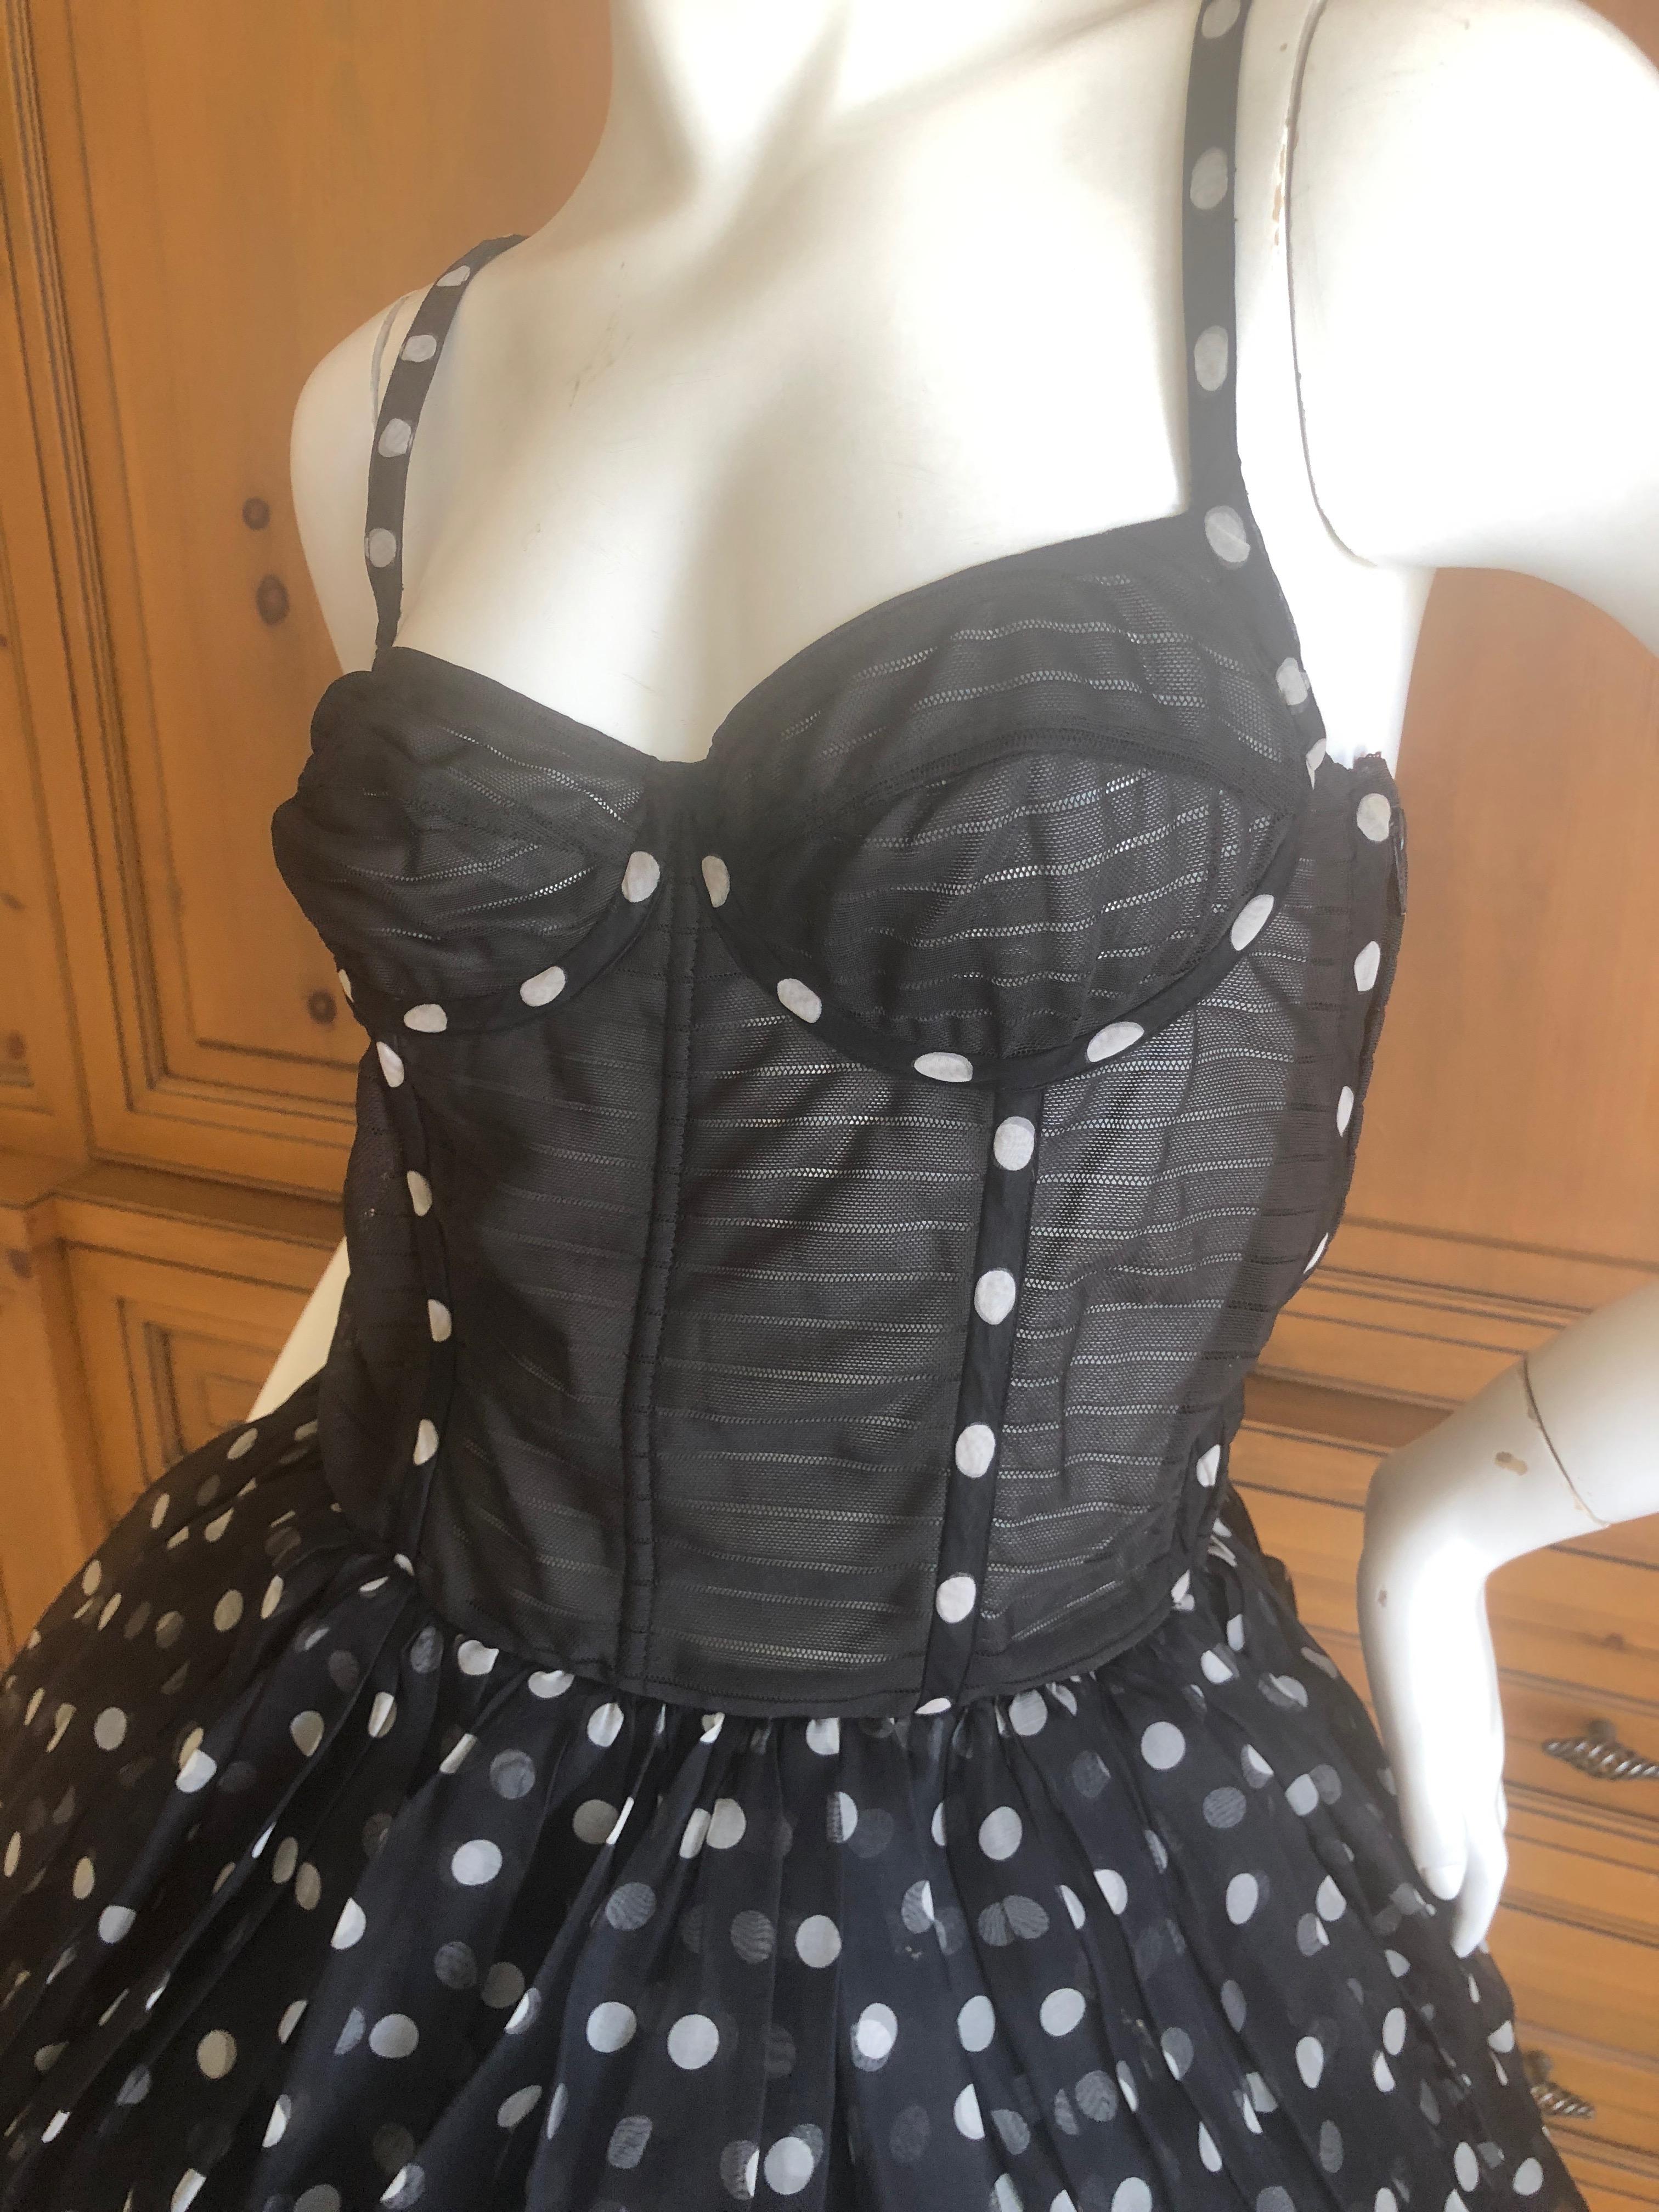 Christian Dior Gianfranco Ferre Numbered Demi Couture Corset Ballerina Dress For Sale 1